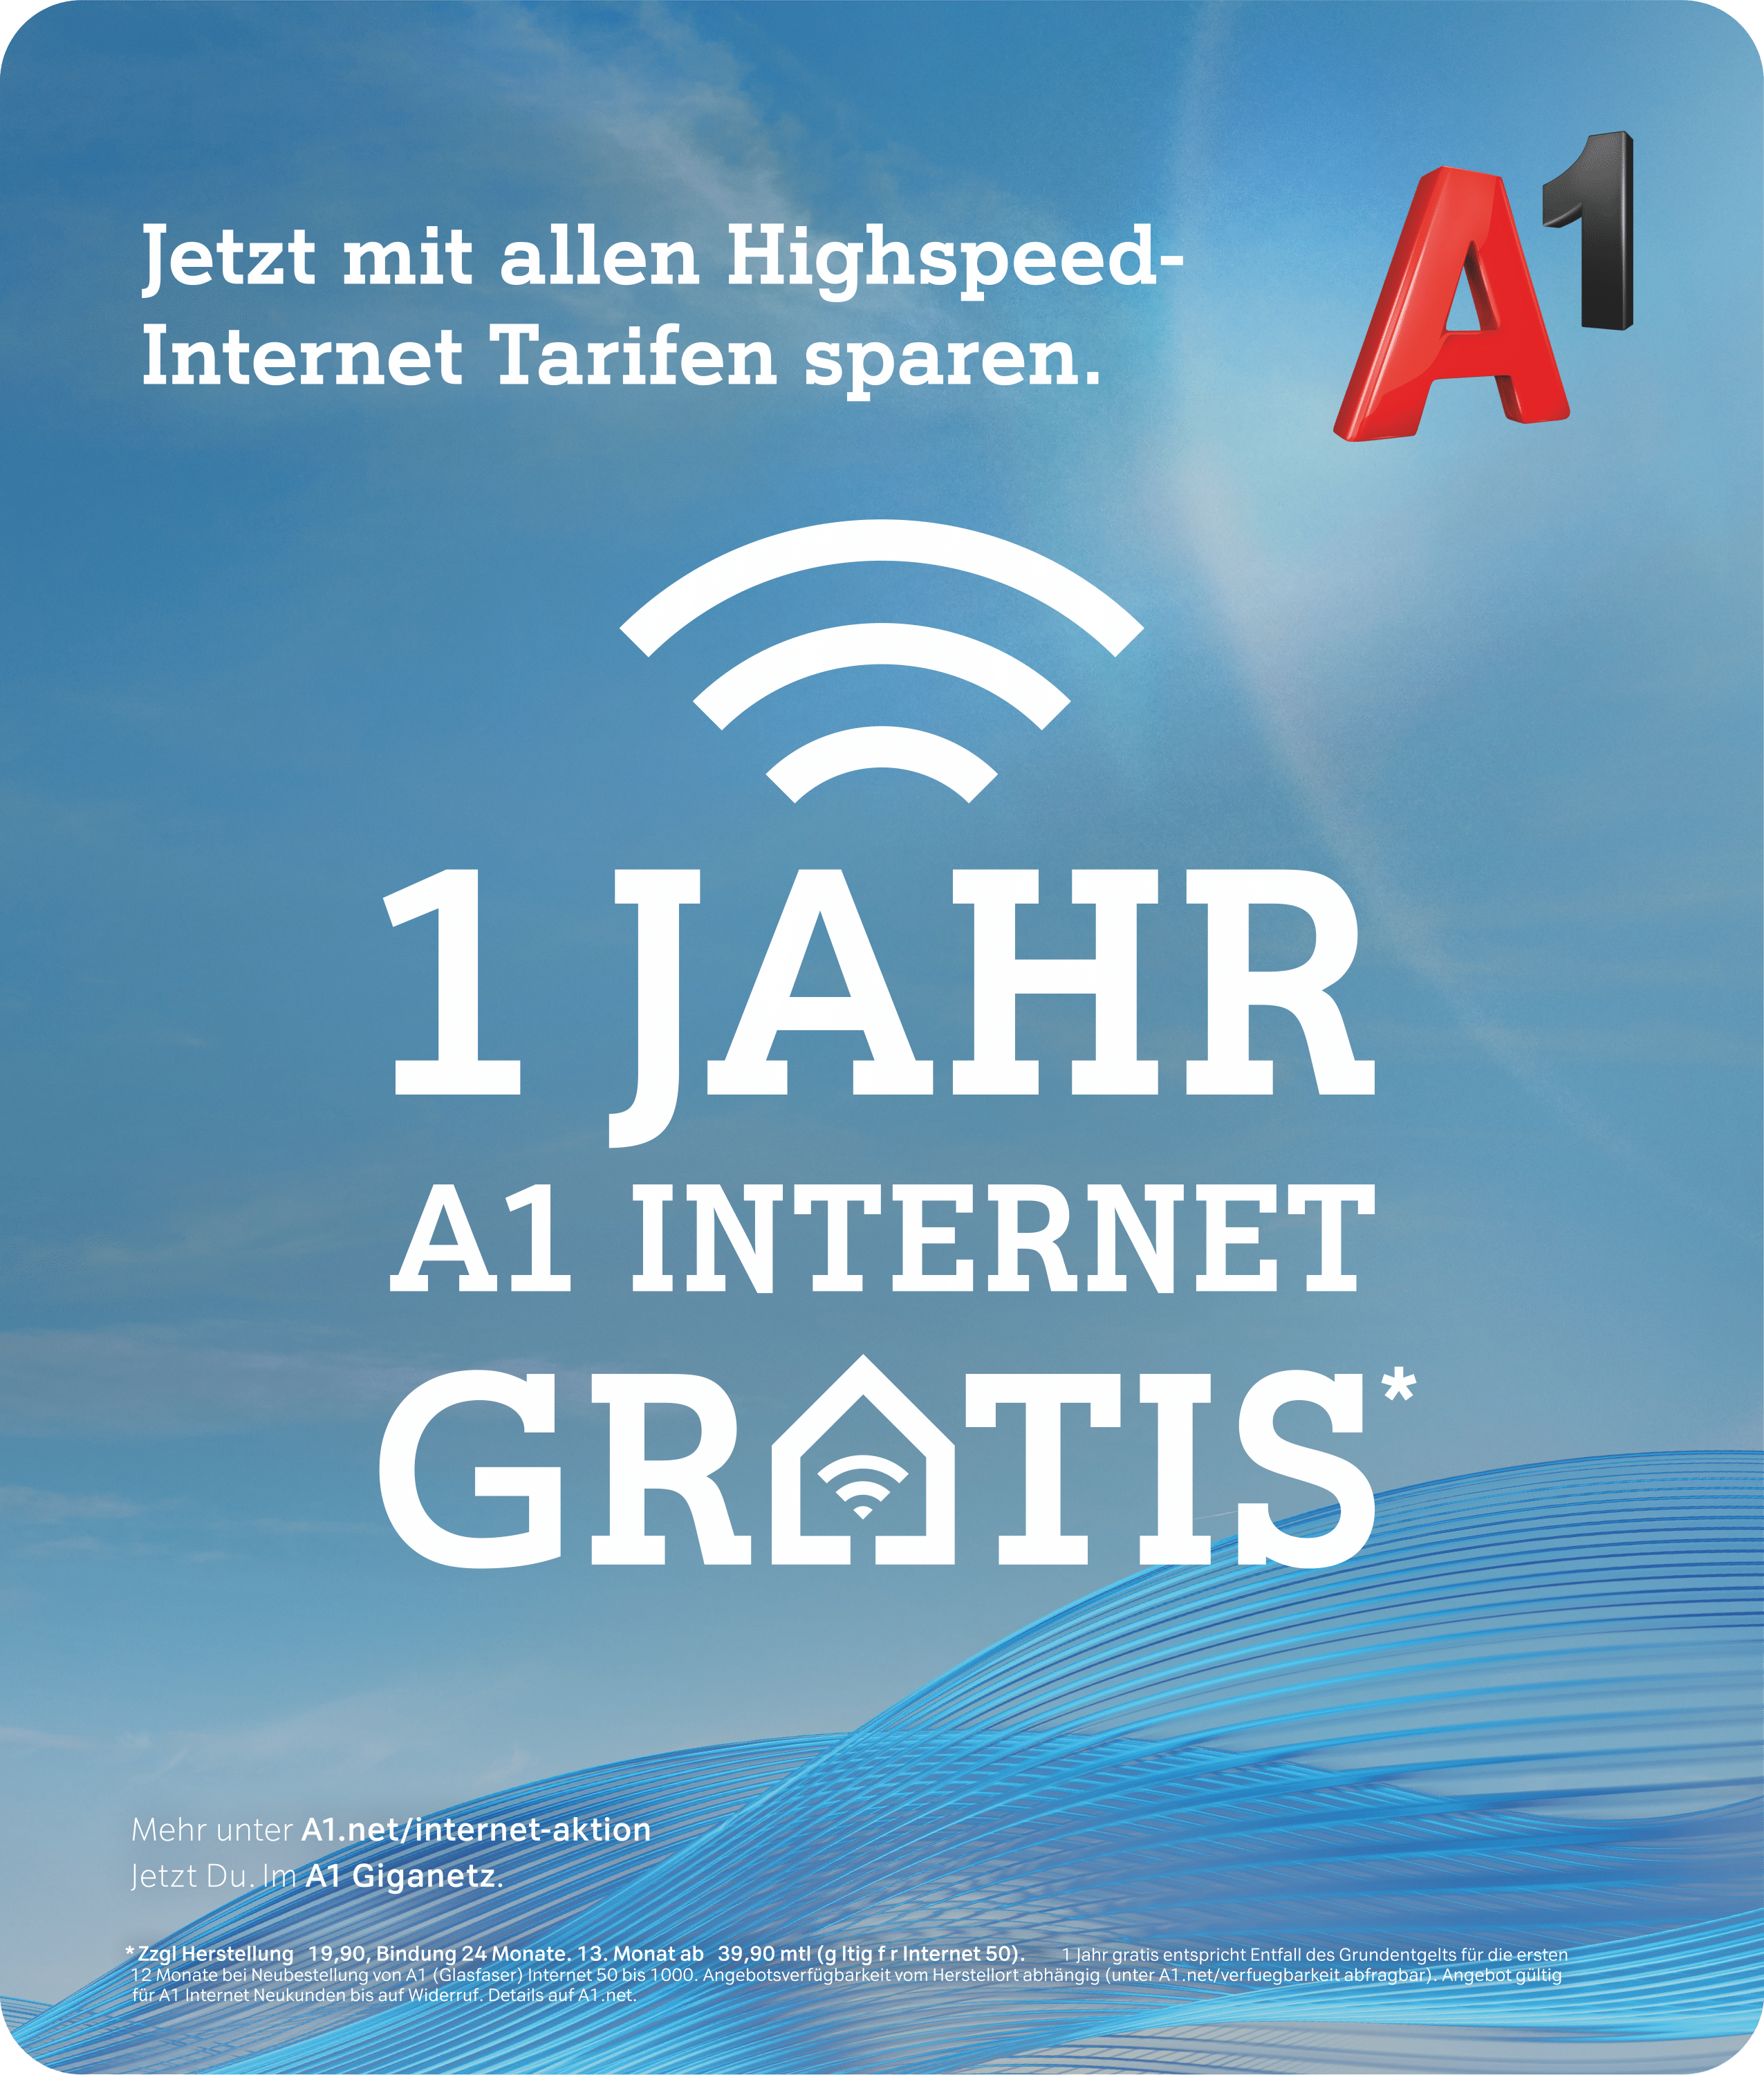 A1 Internet Aktion rounded